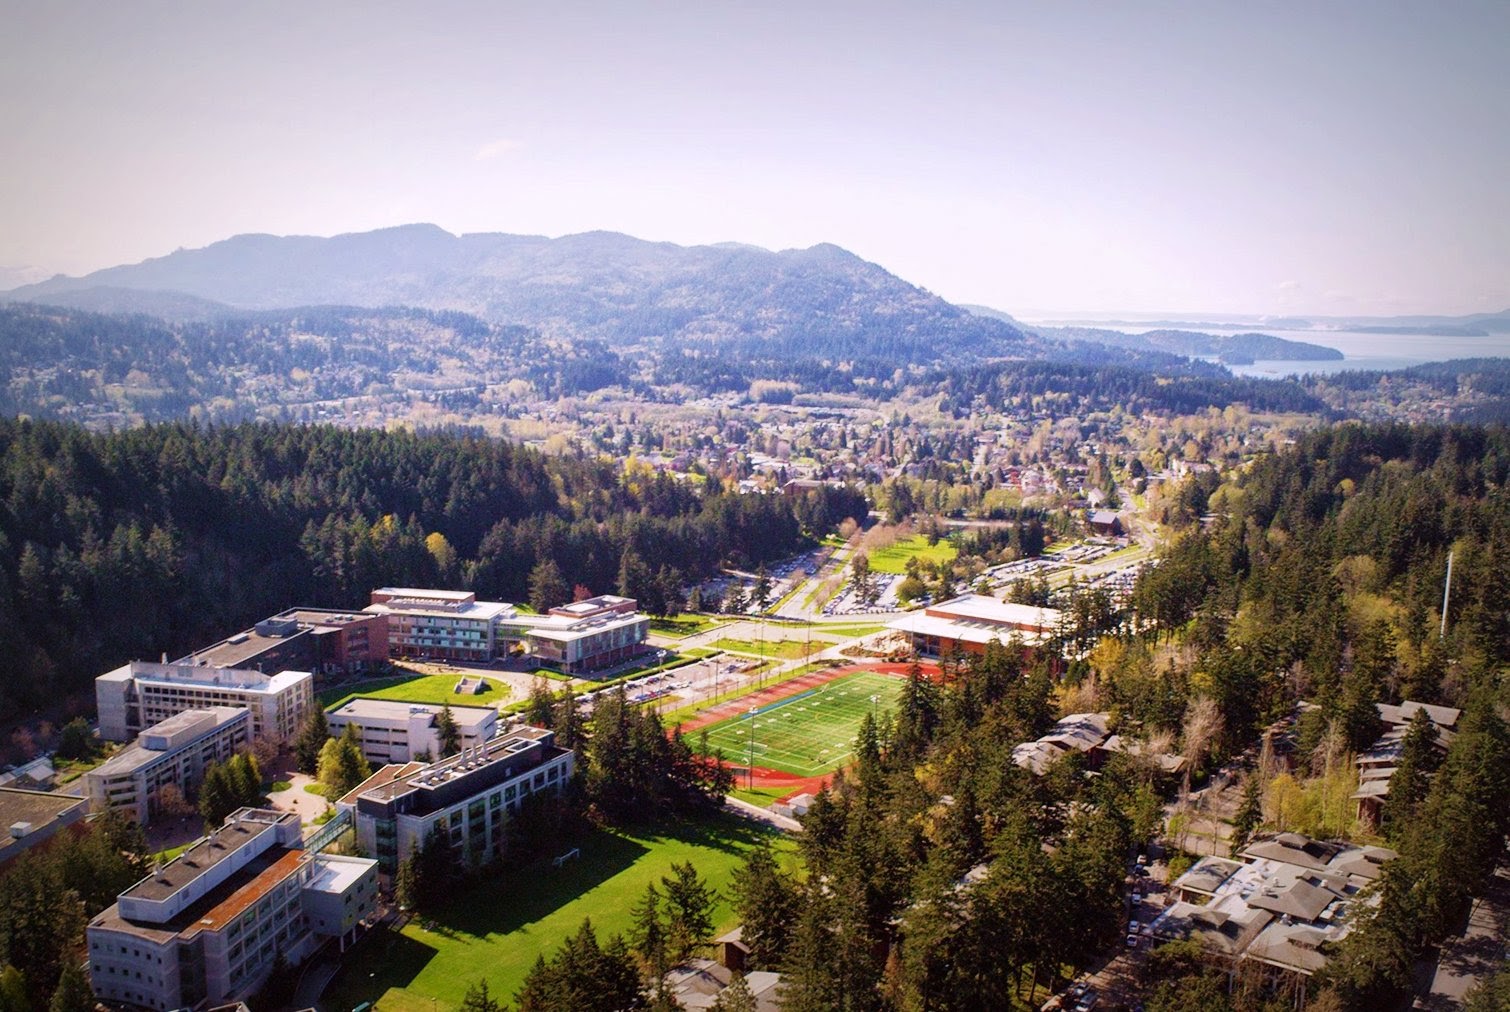 Aerial photo of Western's campus taken from above the arboretum